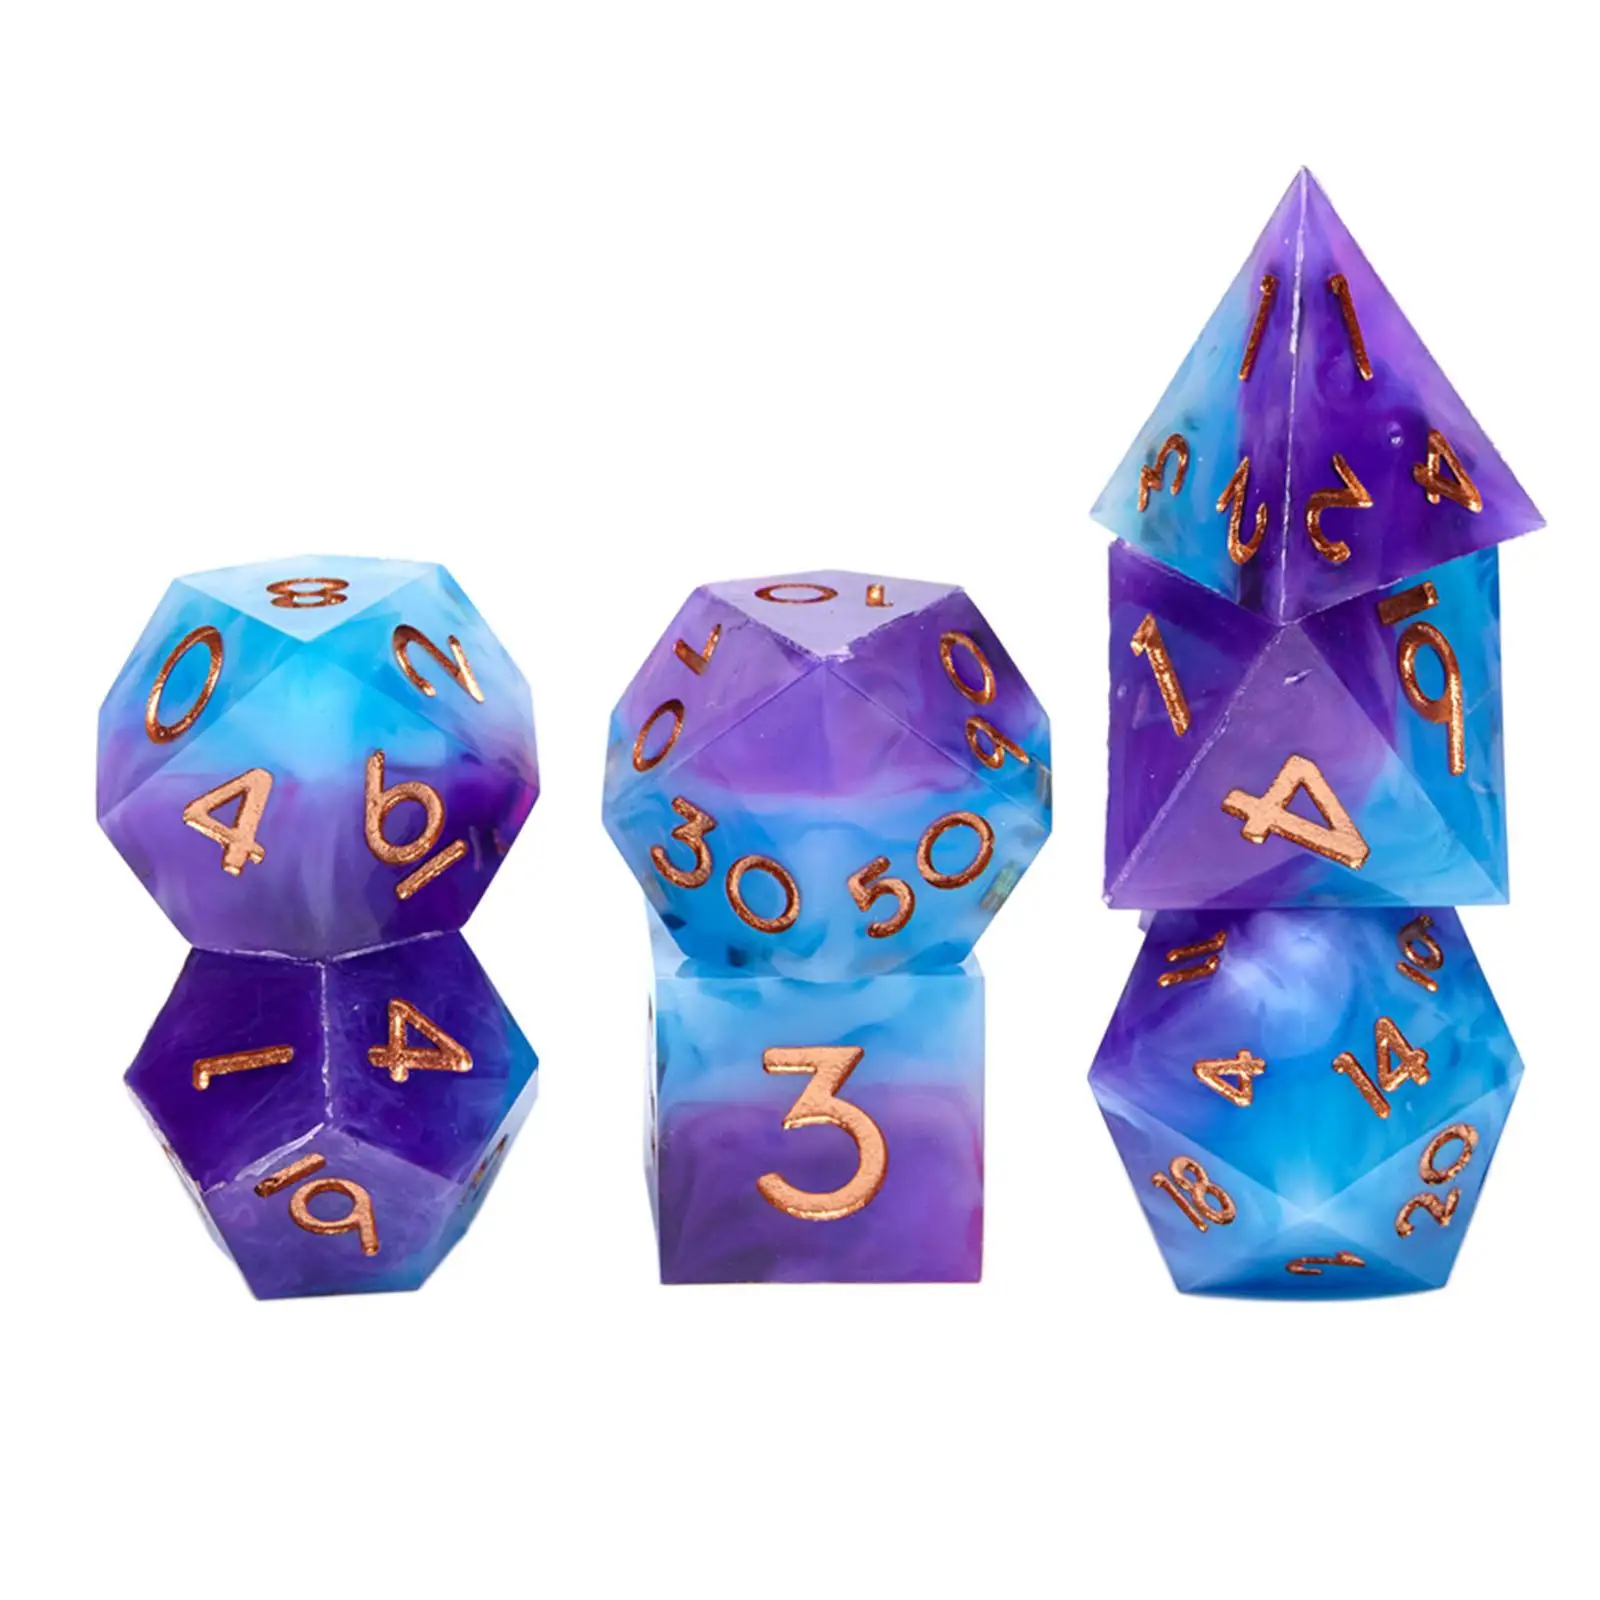 7x Polyhedral Dice Play Entertainment Toys Family Table Game for Table Board Family Gathering